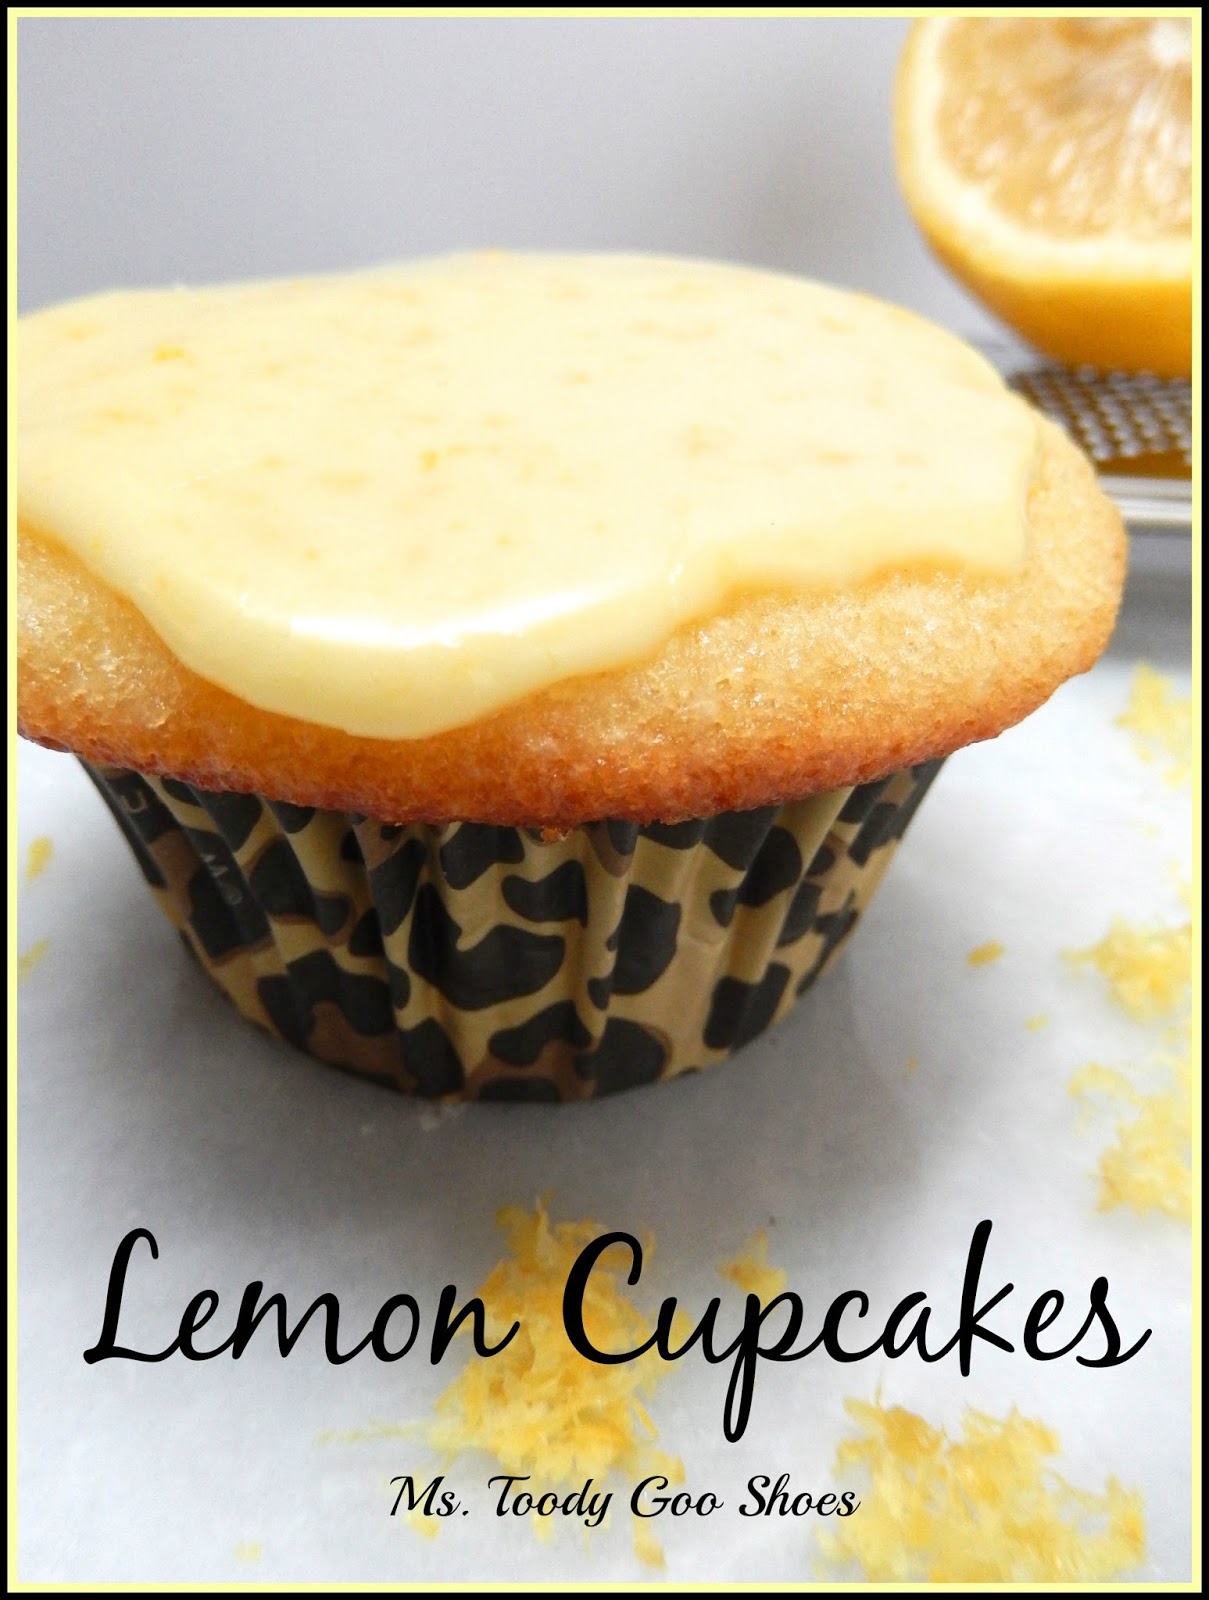 Lemon Cupcakes - One of my top five dessert recipes of 2014